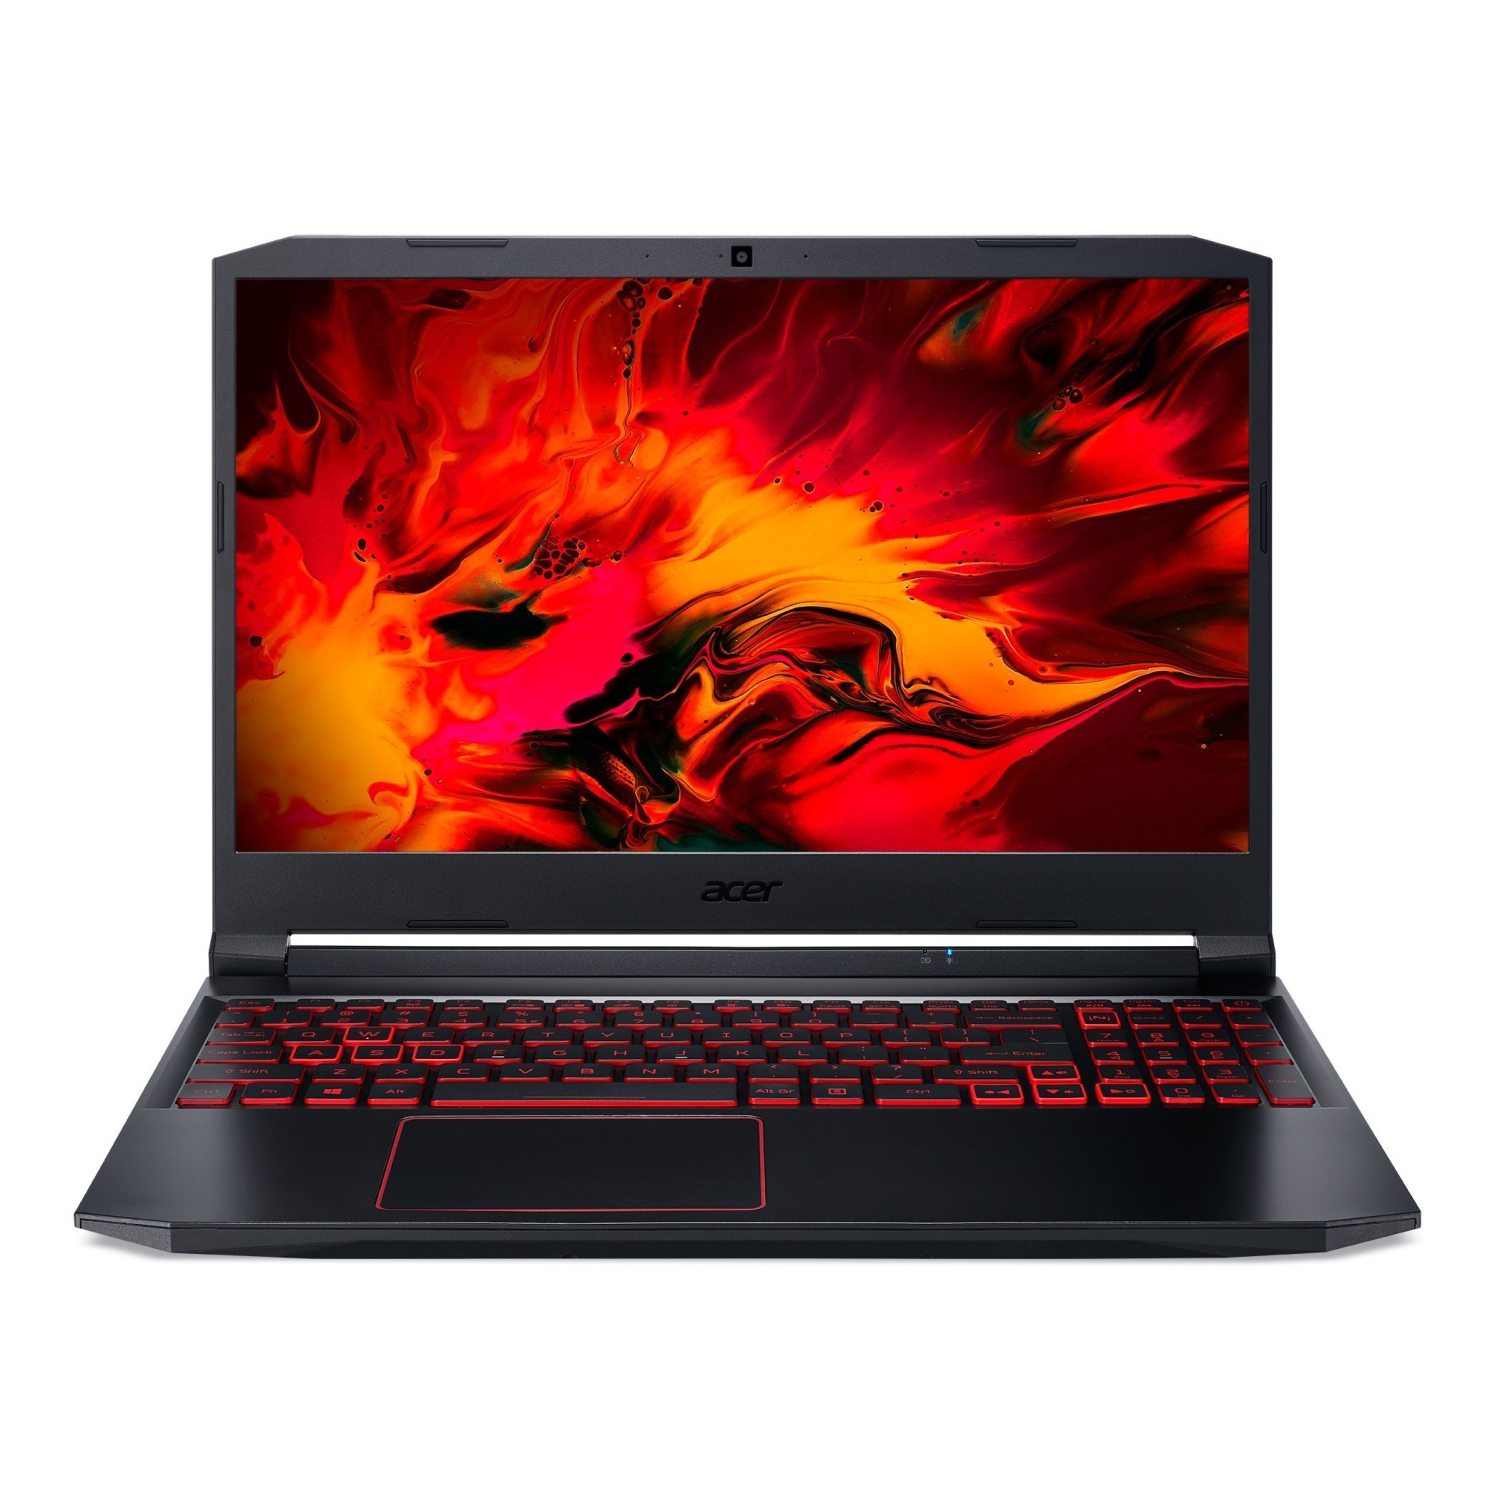 Refurbished (Excellent) - Acer 15.6" Nitro Laptop (Intel i5-10300H/256GB SSD/8GB/Nvidia GTX 1650/Win10) - Manufacturer ReCertified w/ 1 Year Warranty